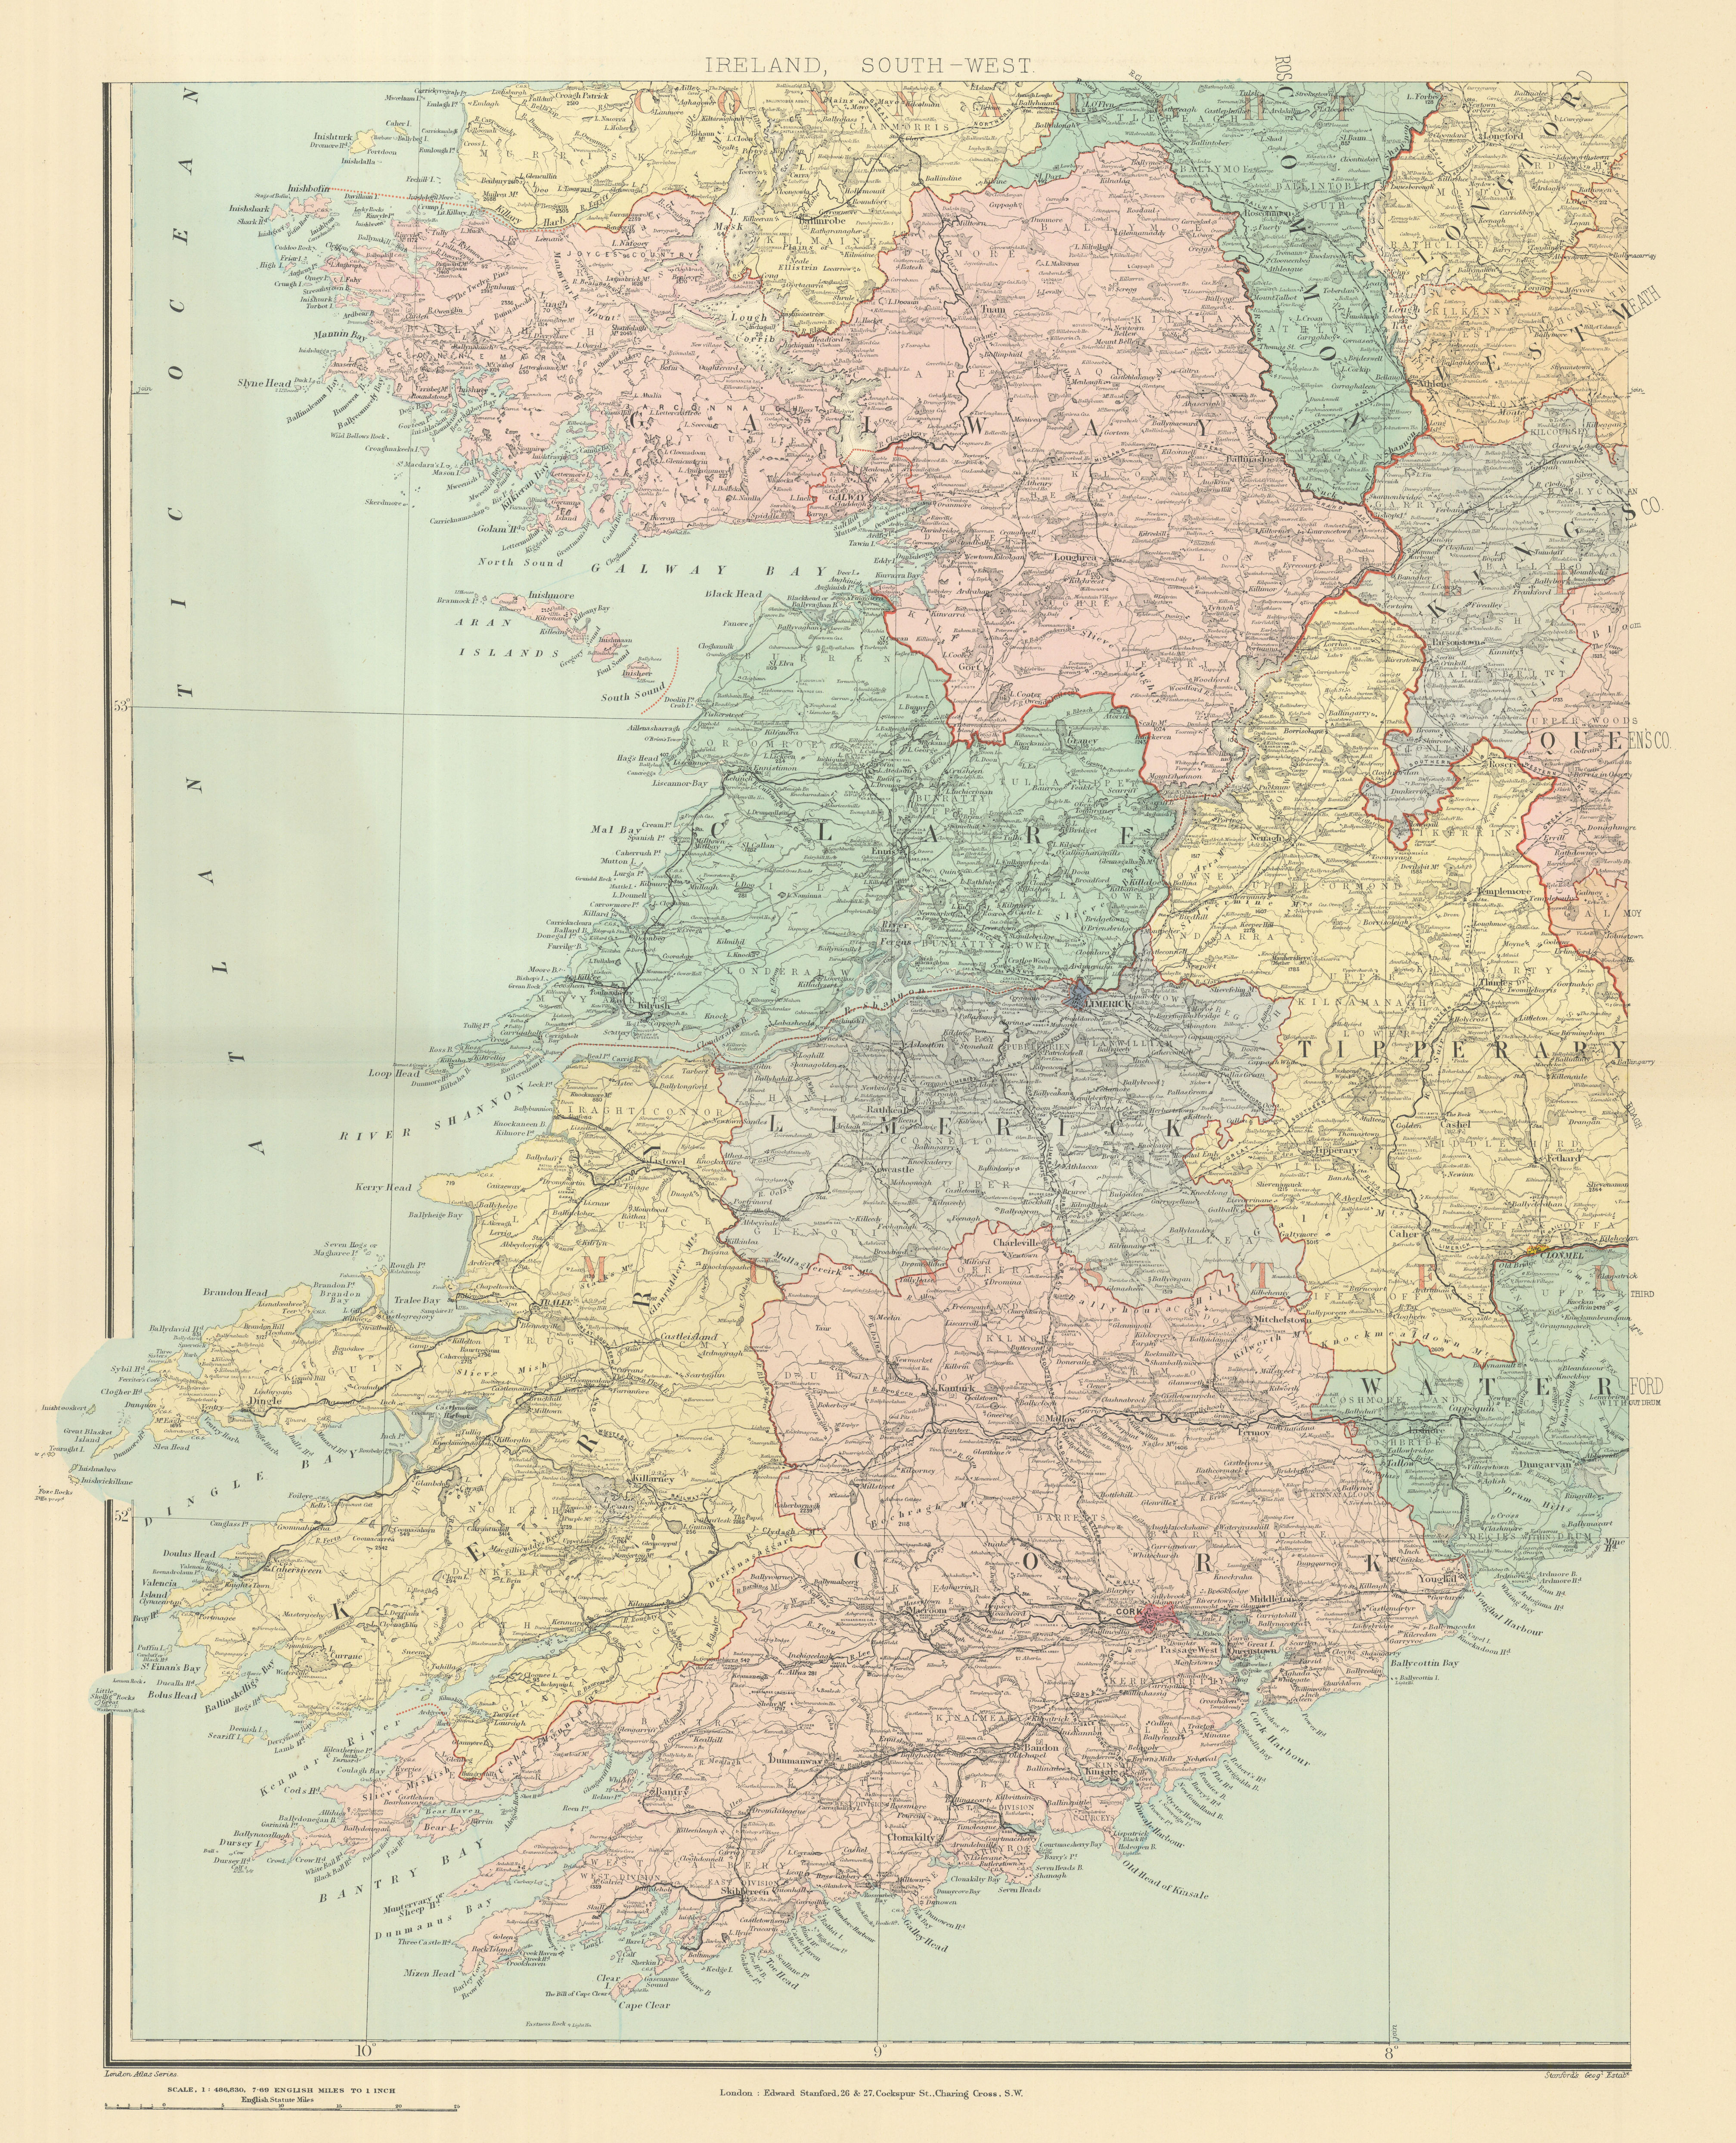 Associate Product Ireland south-west Munster Kerry Limerick Cork Clare Limerick. STANFORD 1894 map